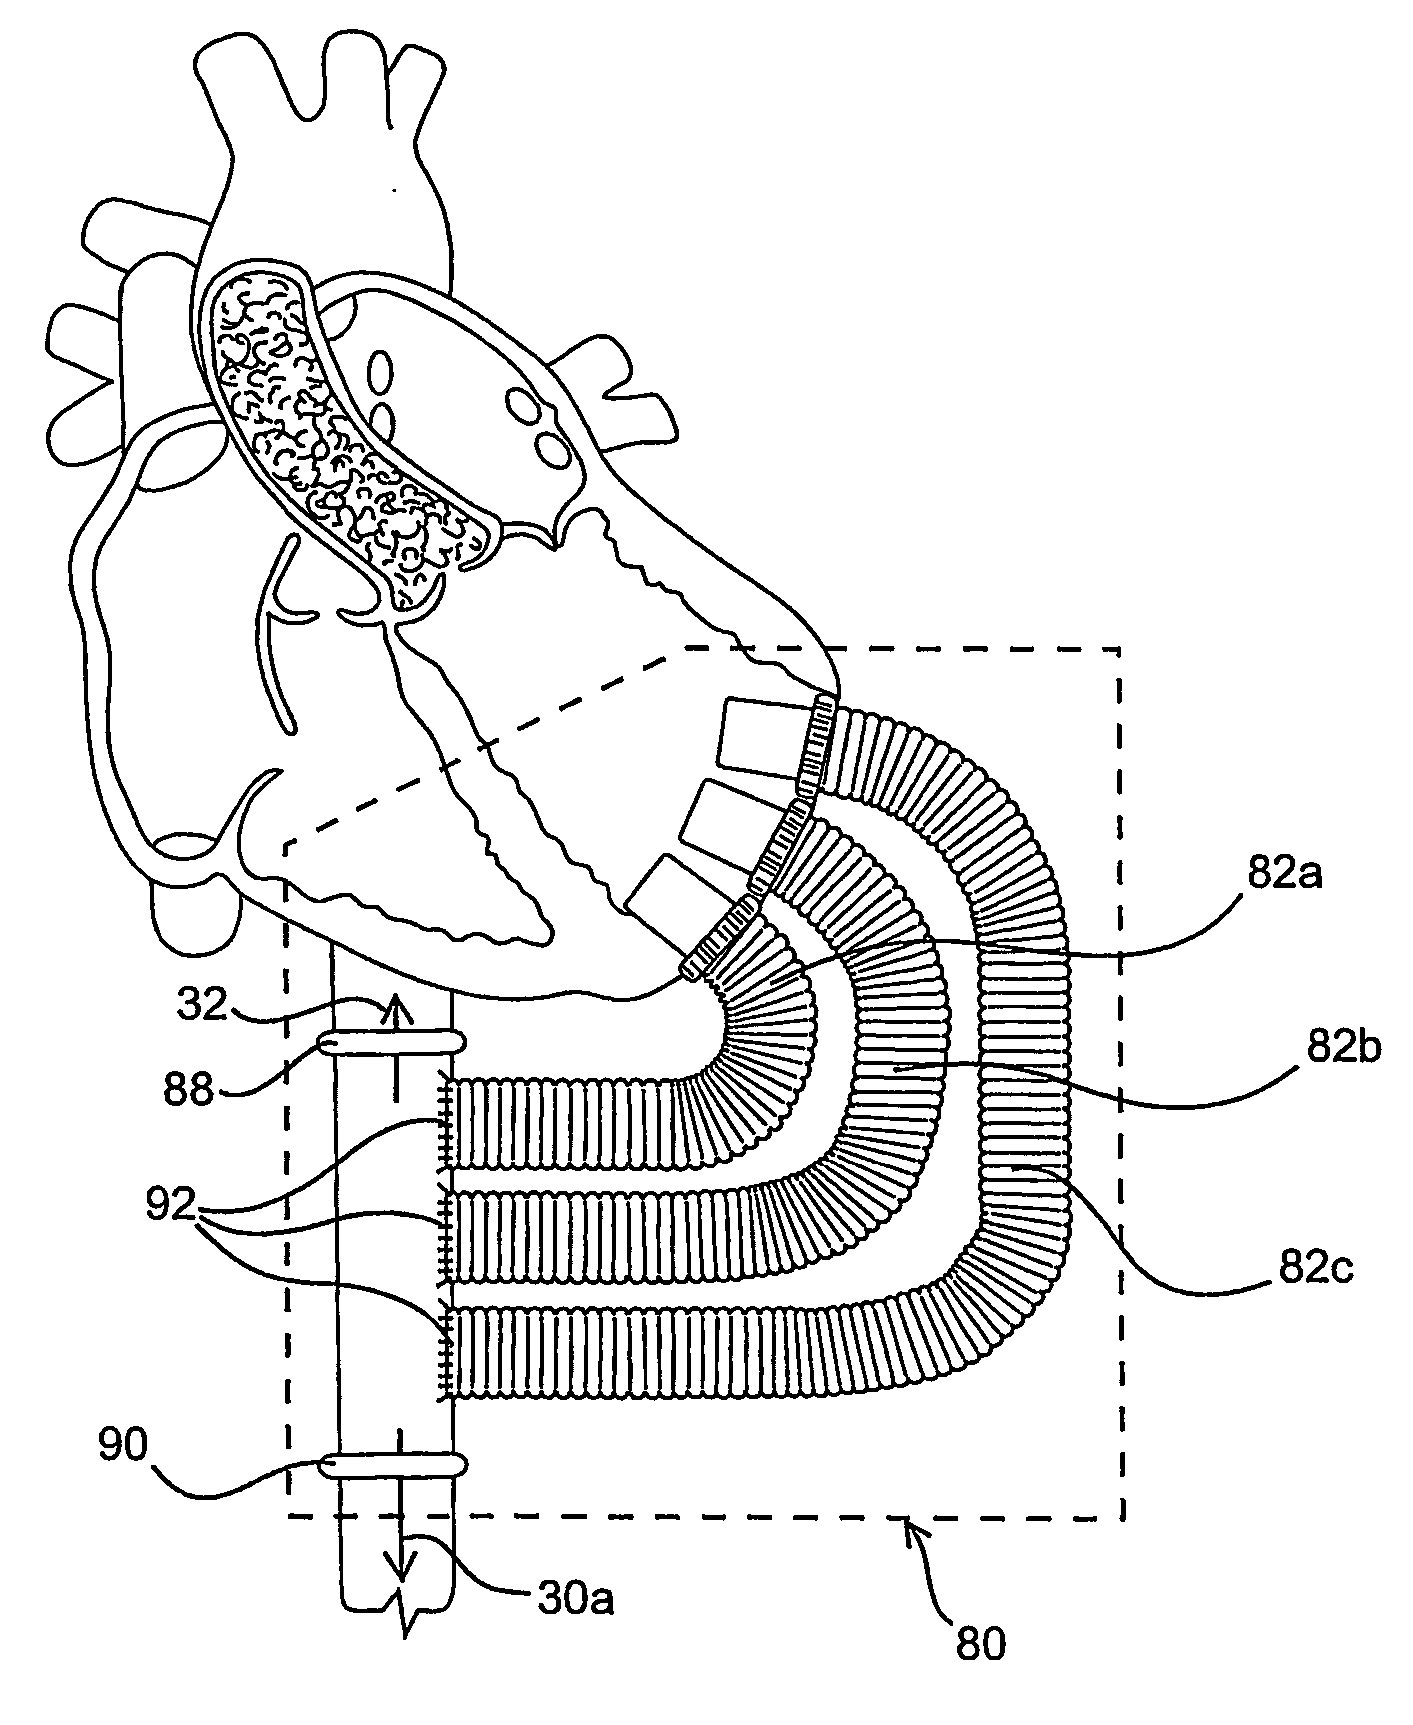 Methods and devices for improving cardiac output